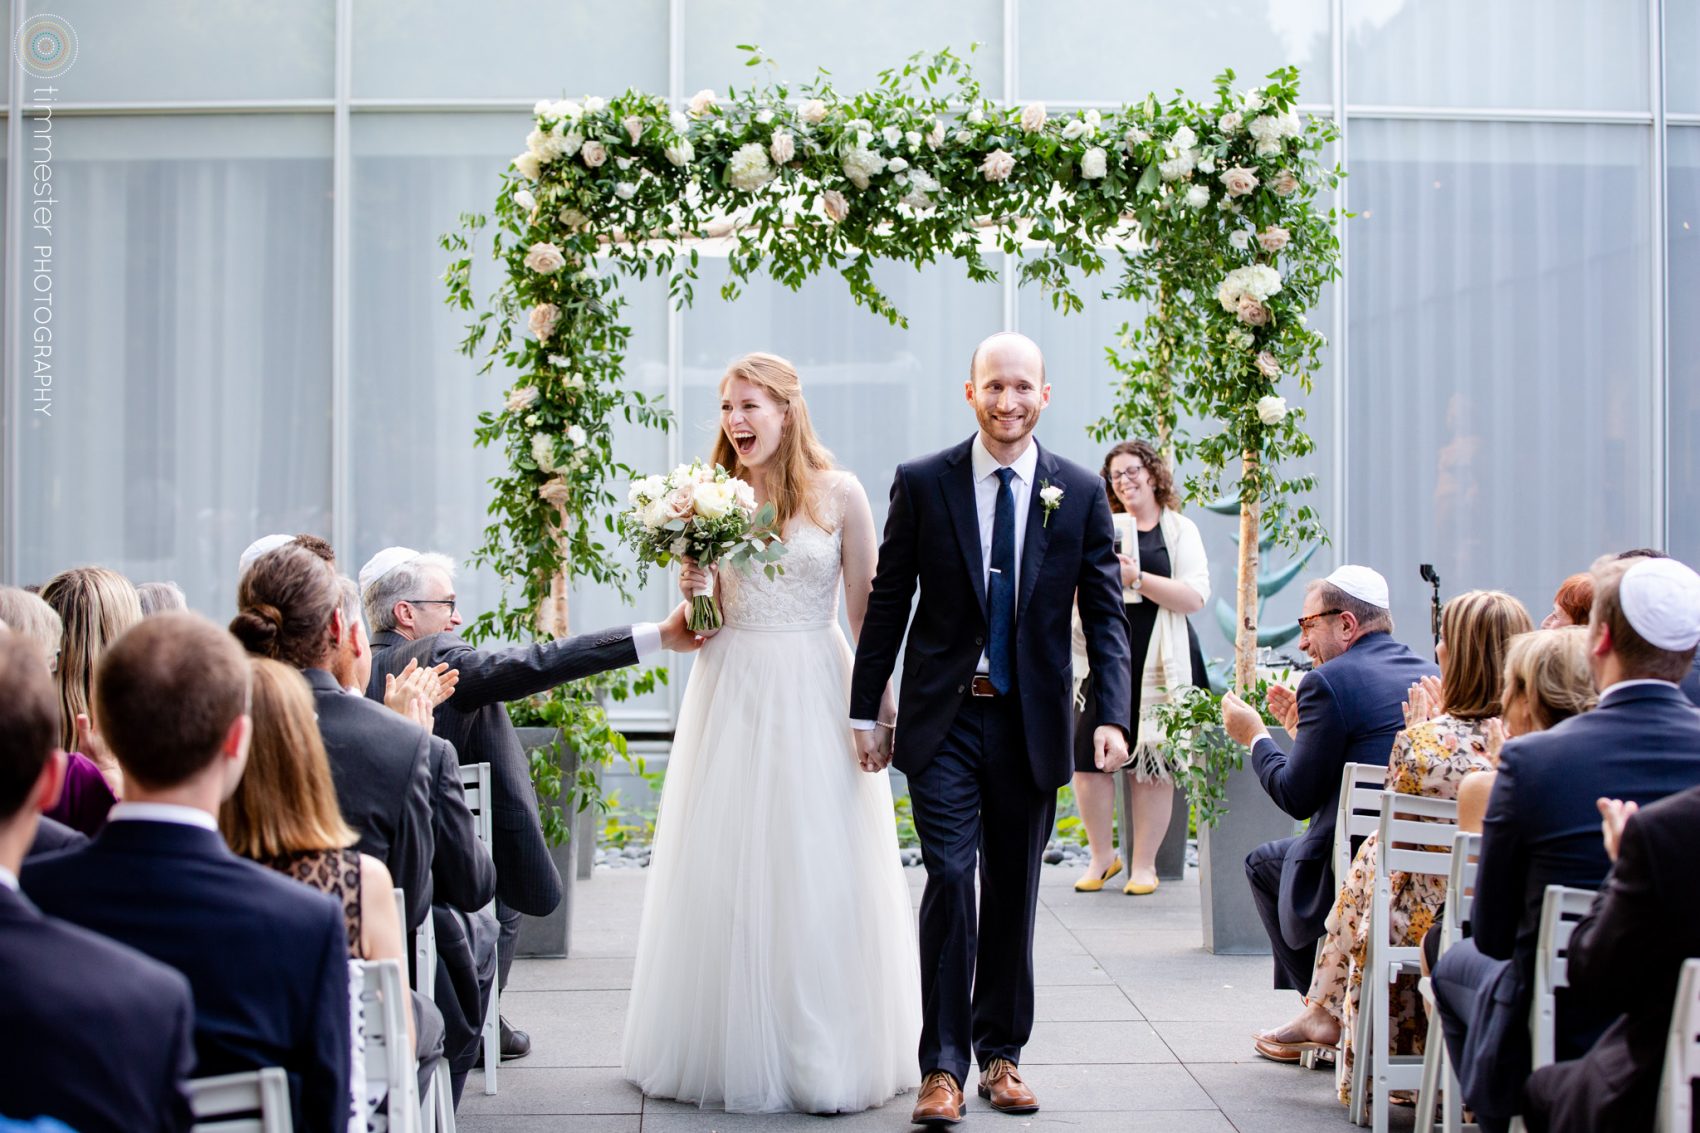 A bride and groom are married in an outdoor, courtyard wedding ceremony at NCMA in Raleigh, North Carolina.